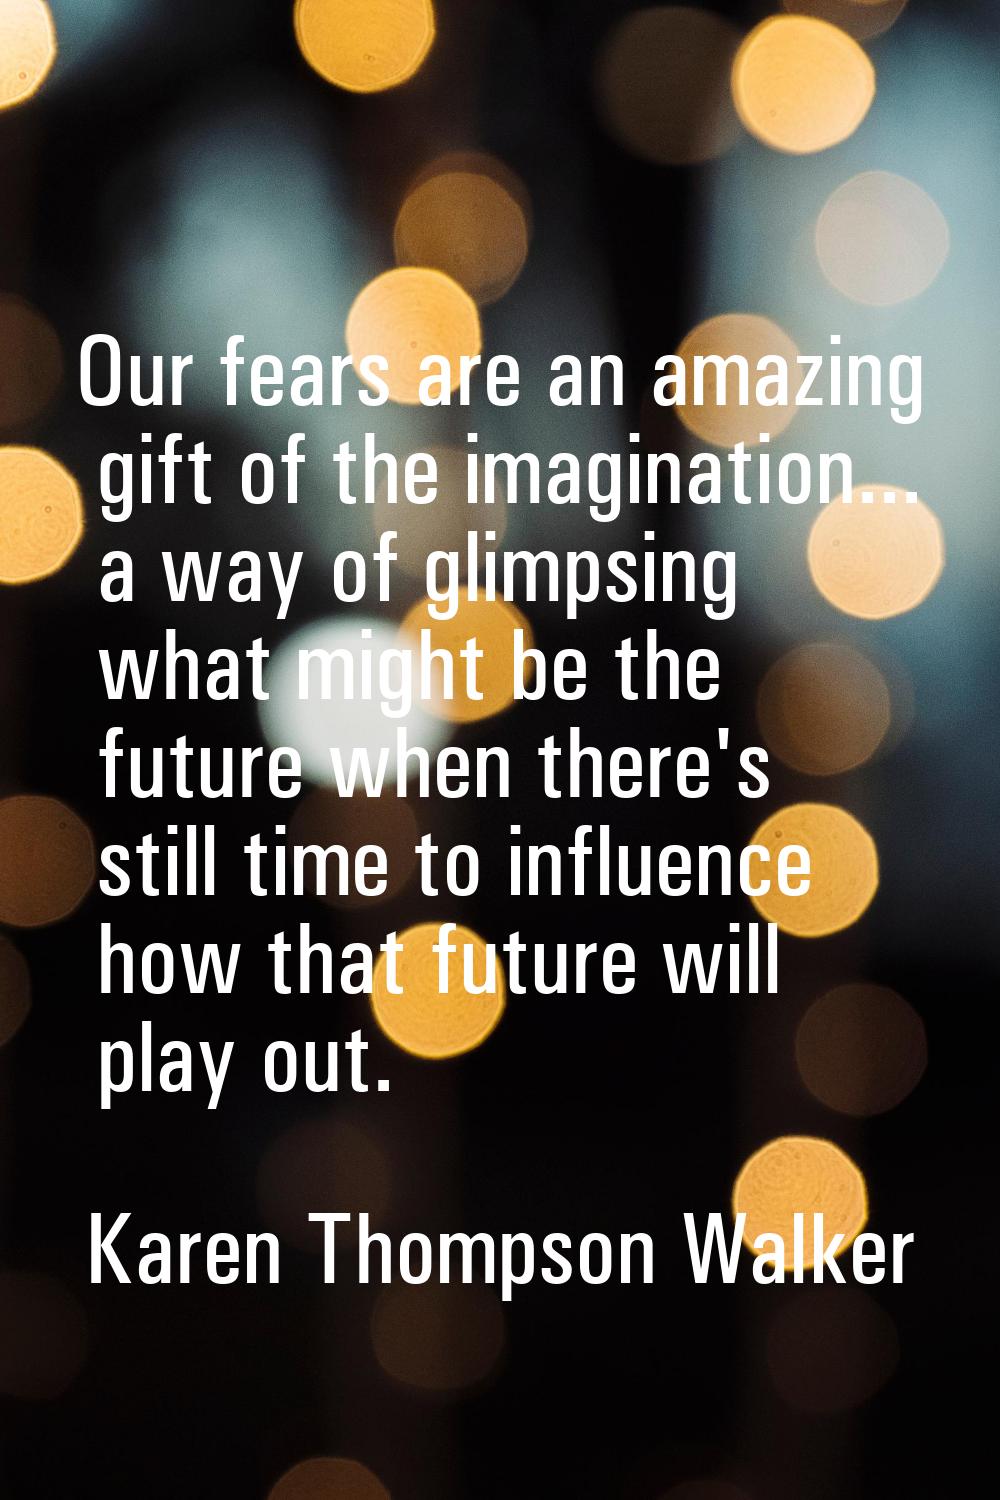 Our fears are an amazing gift of the imagination... a way of glimpsing what might be the future whe